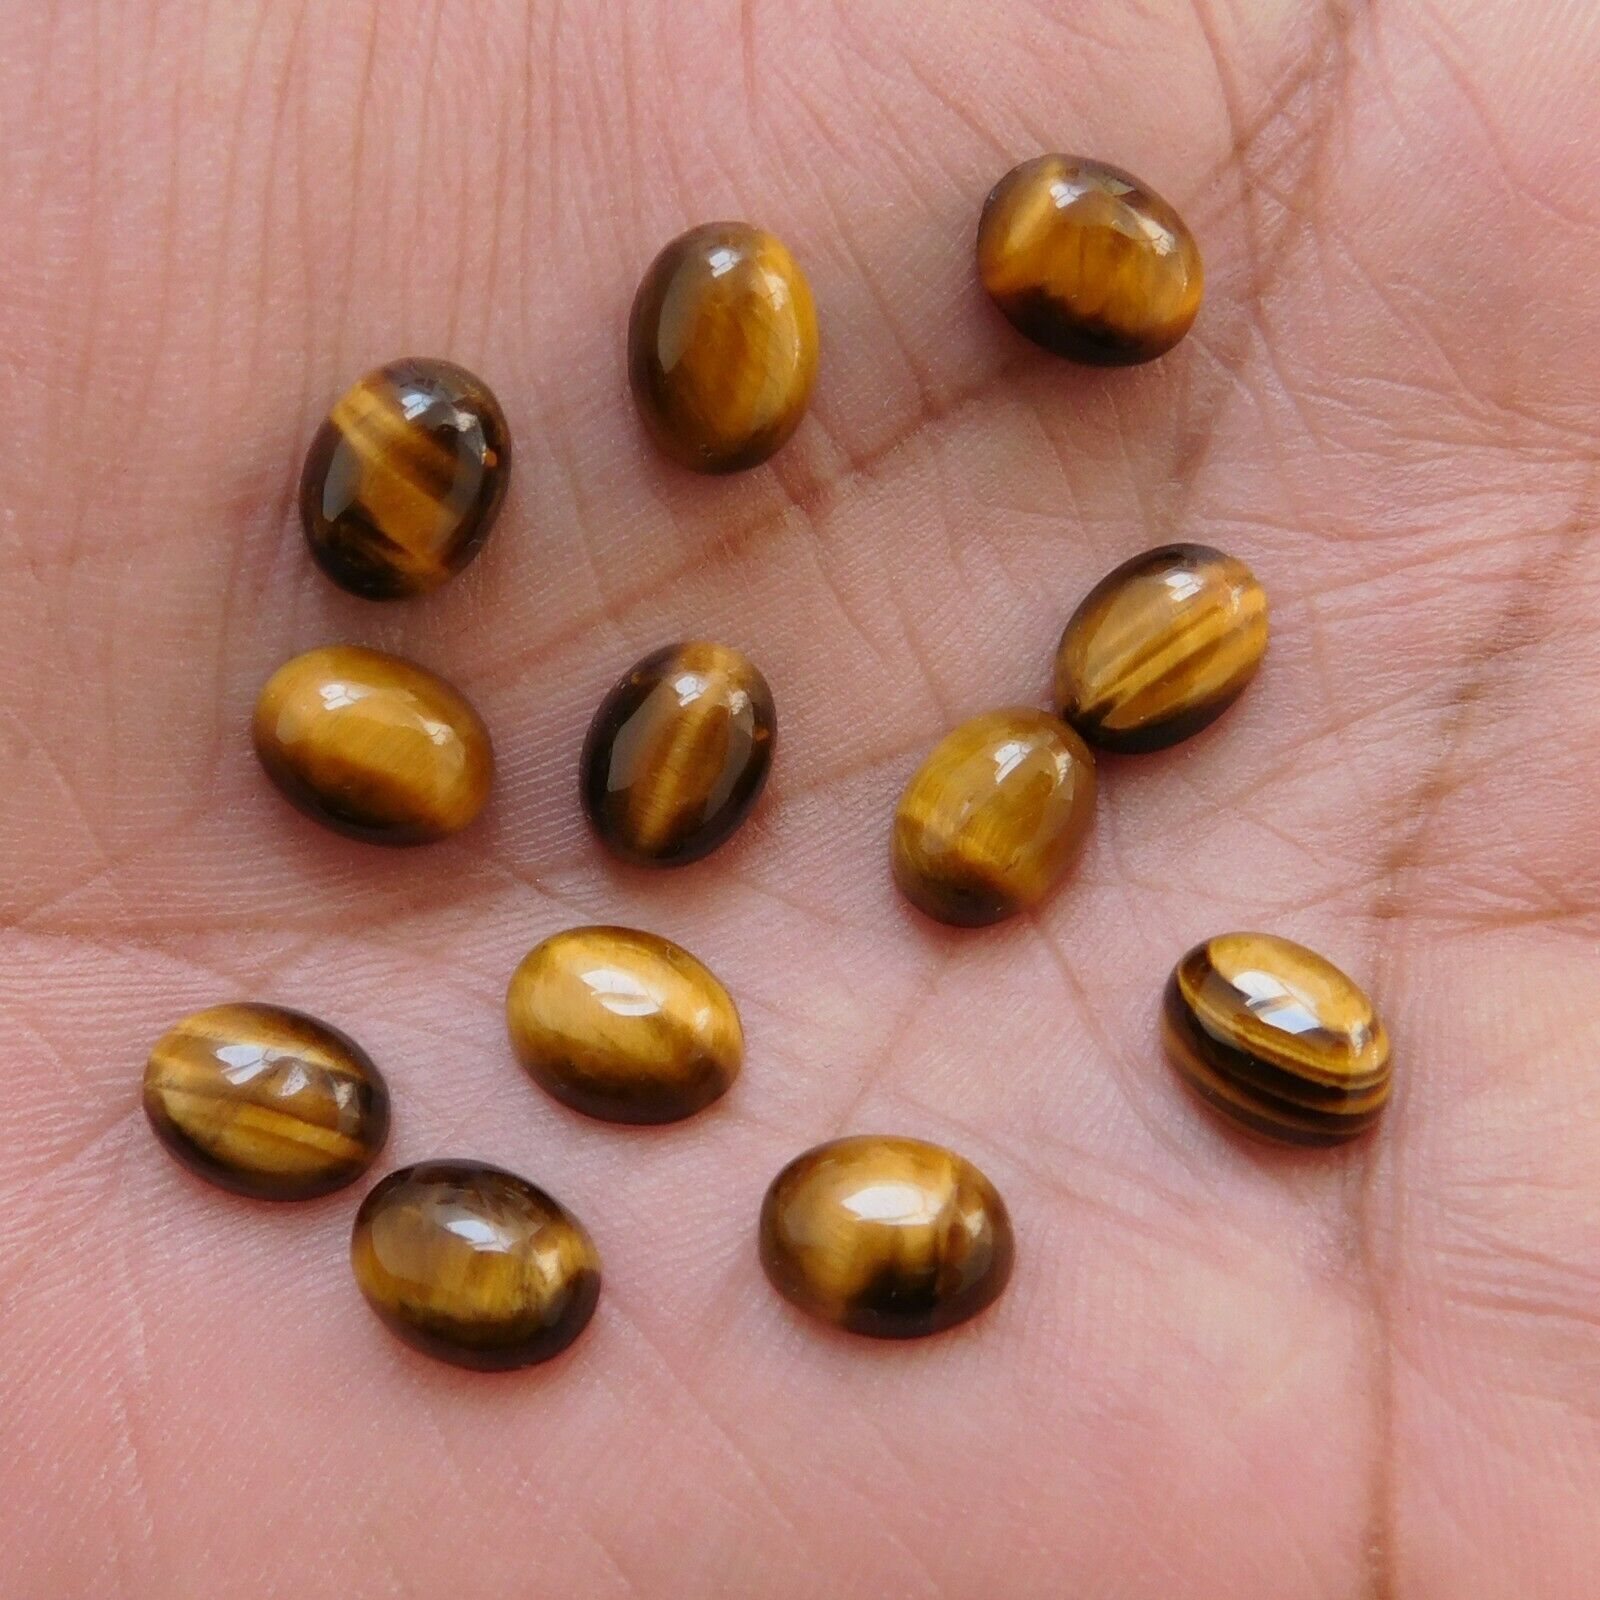 Primary image for 9x11 mm Oval Natural Tiger's Eye Cabochon Loose Gemstone Wholesale Lot 50 pcs